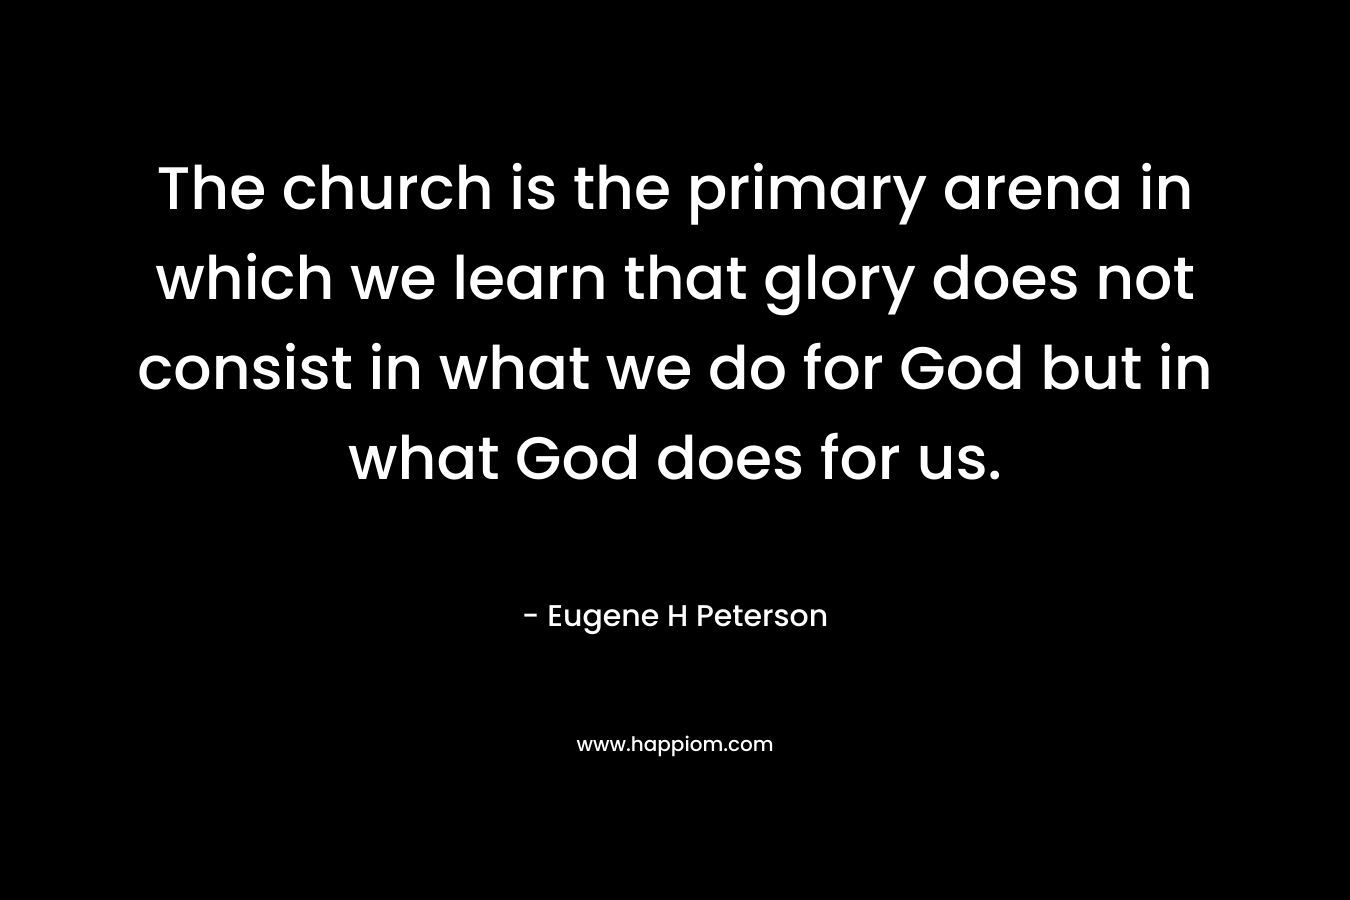 The church is the primary arena in which we learn that glory does not consist in what we do for God but in what God does for us. – Eugene H Peterson